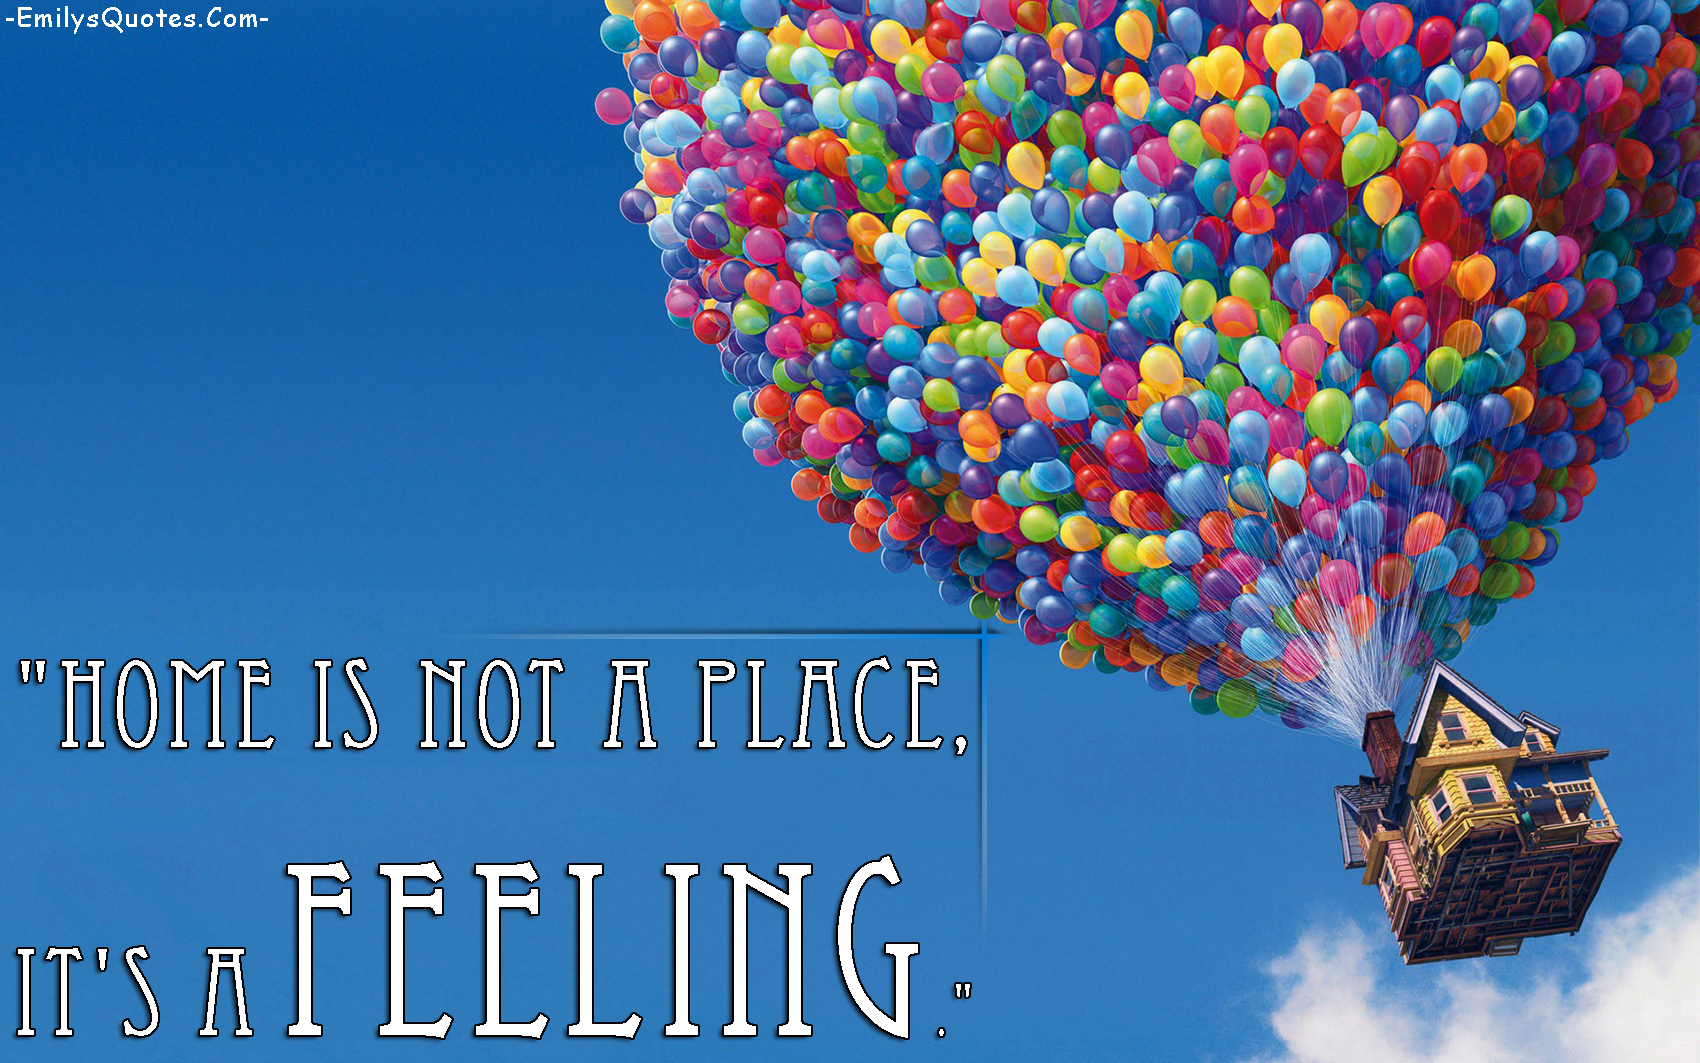 Home is not a place, it's a feeling | Popular inspirational quotes at